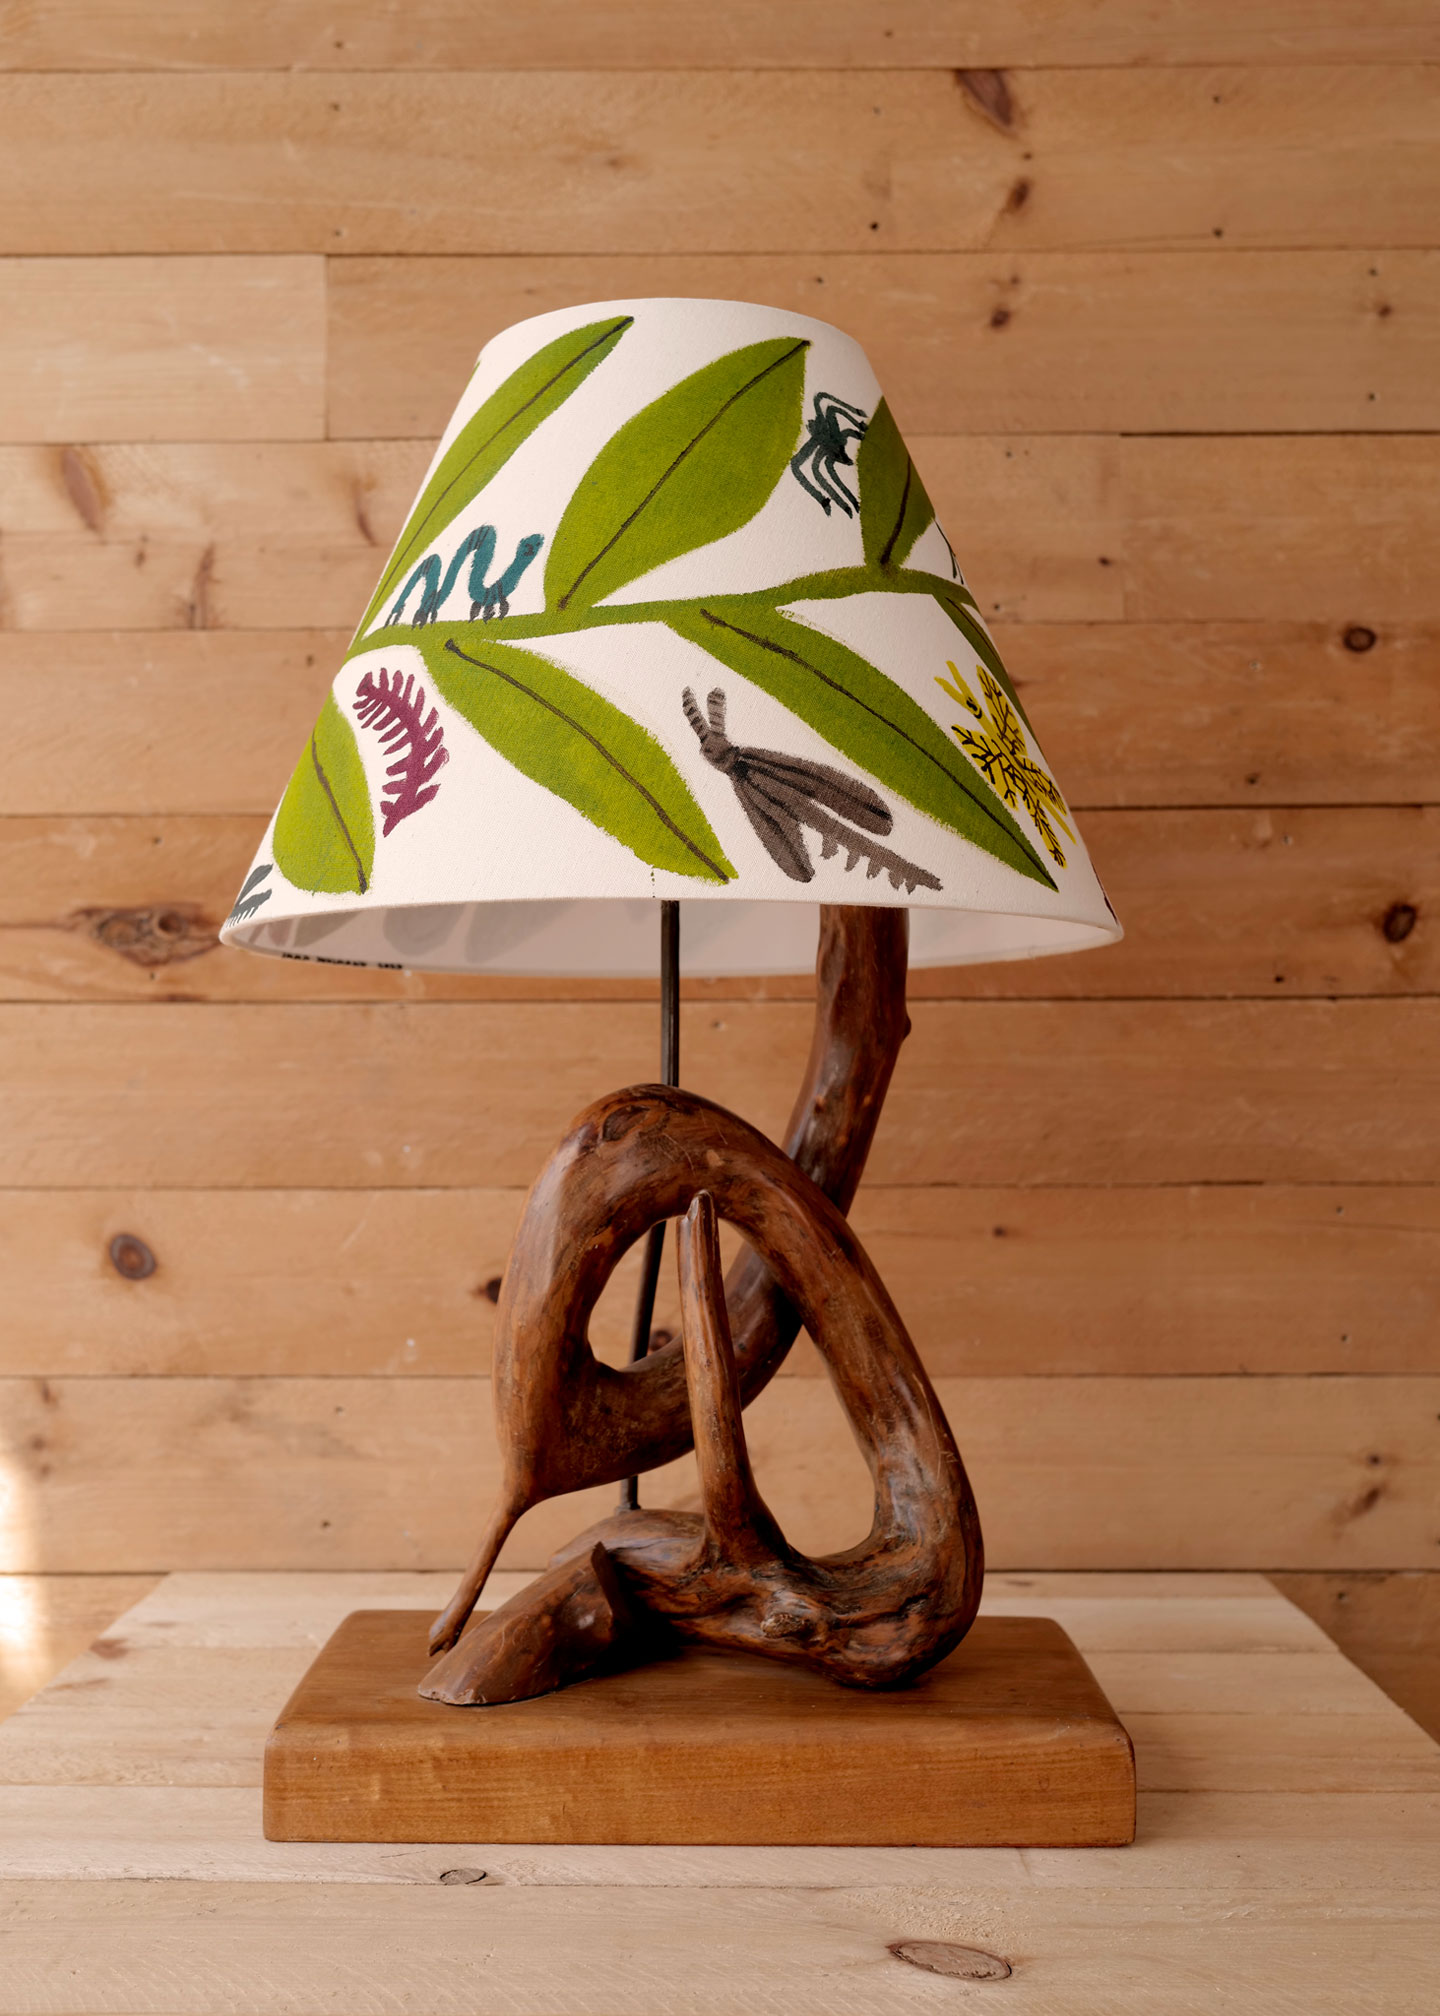 Catherine and Evan of Slow Roads are artist-designers themselves, based in Rochester, NY; their shop showcases contemporary and vintage housewares, all rooted in nature. Like the shades, each of the lamp bases is a one-off. This one is Lamp 4.